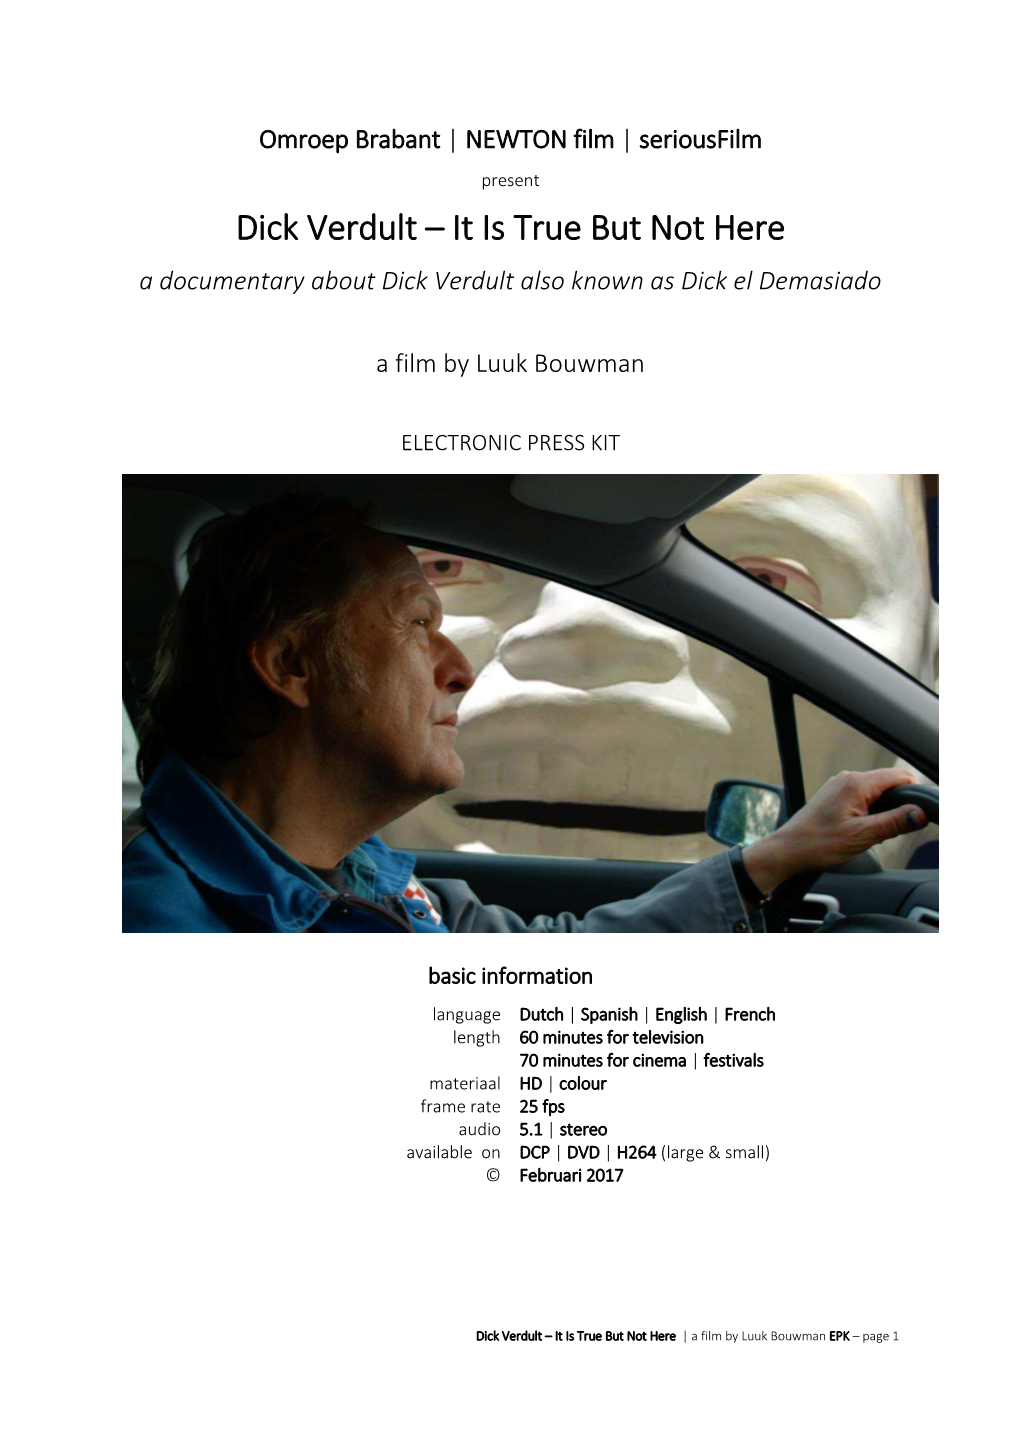 Dick Verdult – It Is True but Not Here a Documentary About Dick Verdult Also Known As Dick El Demasiado